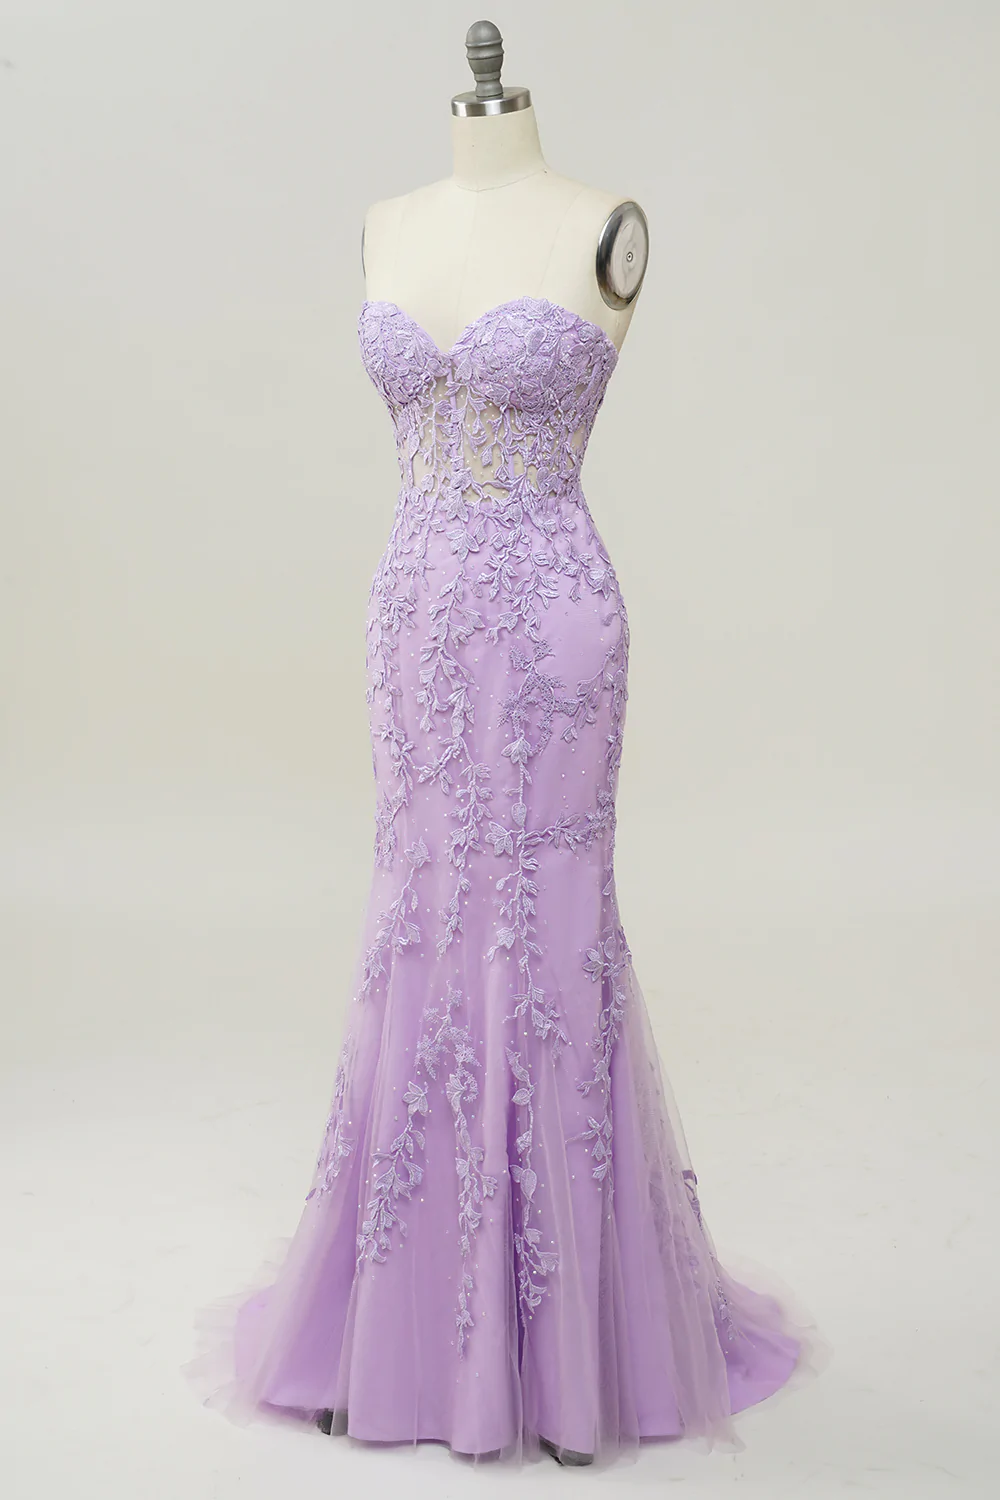 Purple Sweetheart Neck Mermaid Prom Dress With Appliques Y860